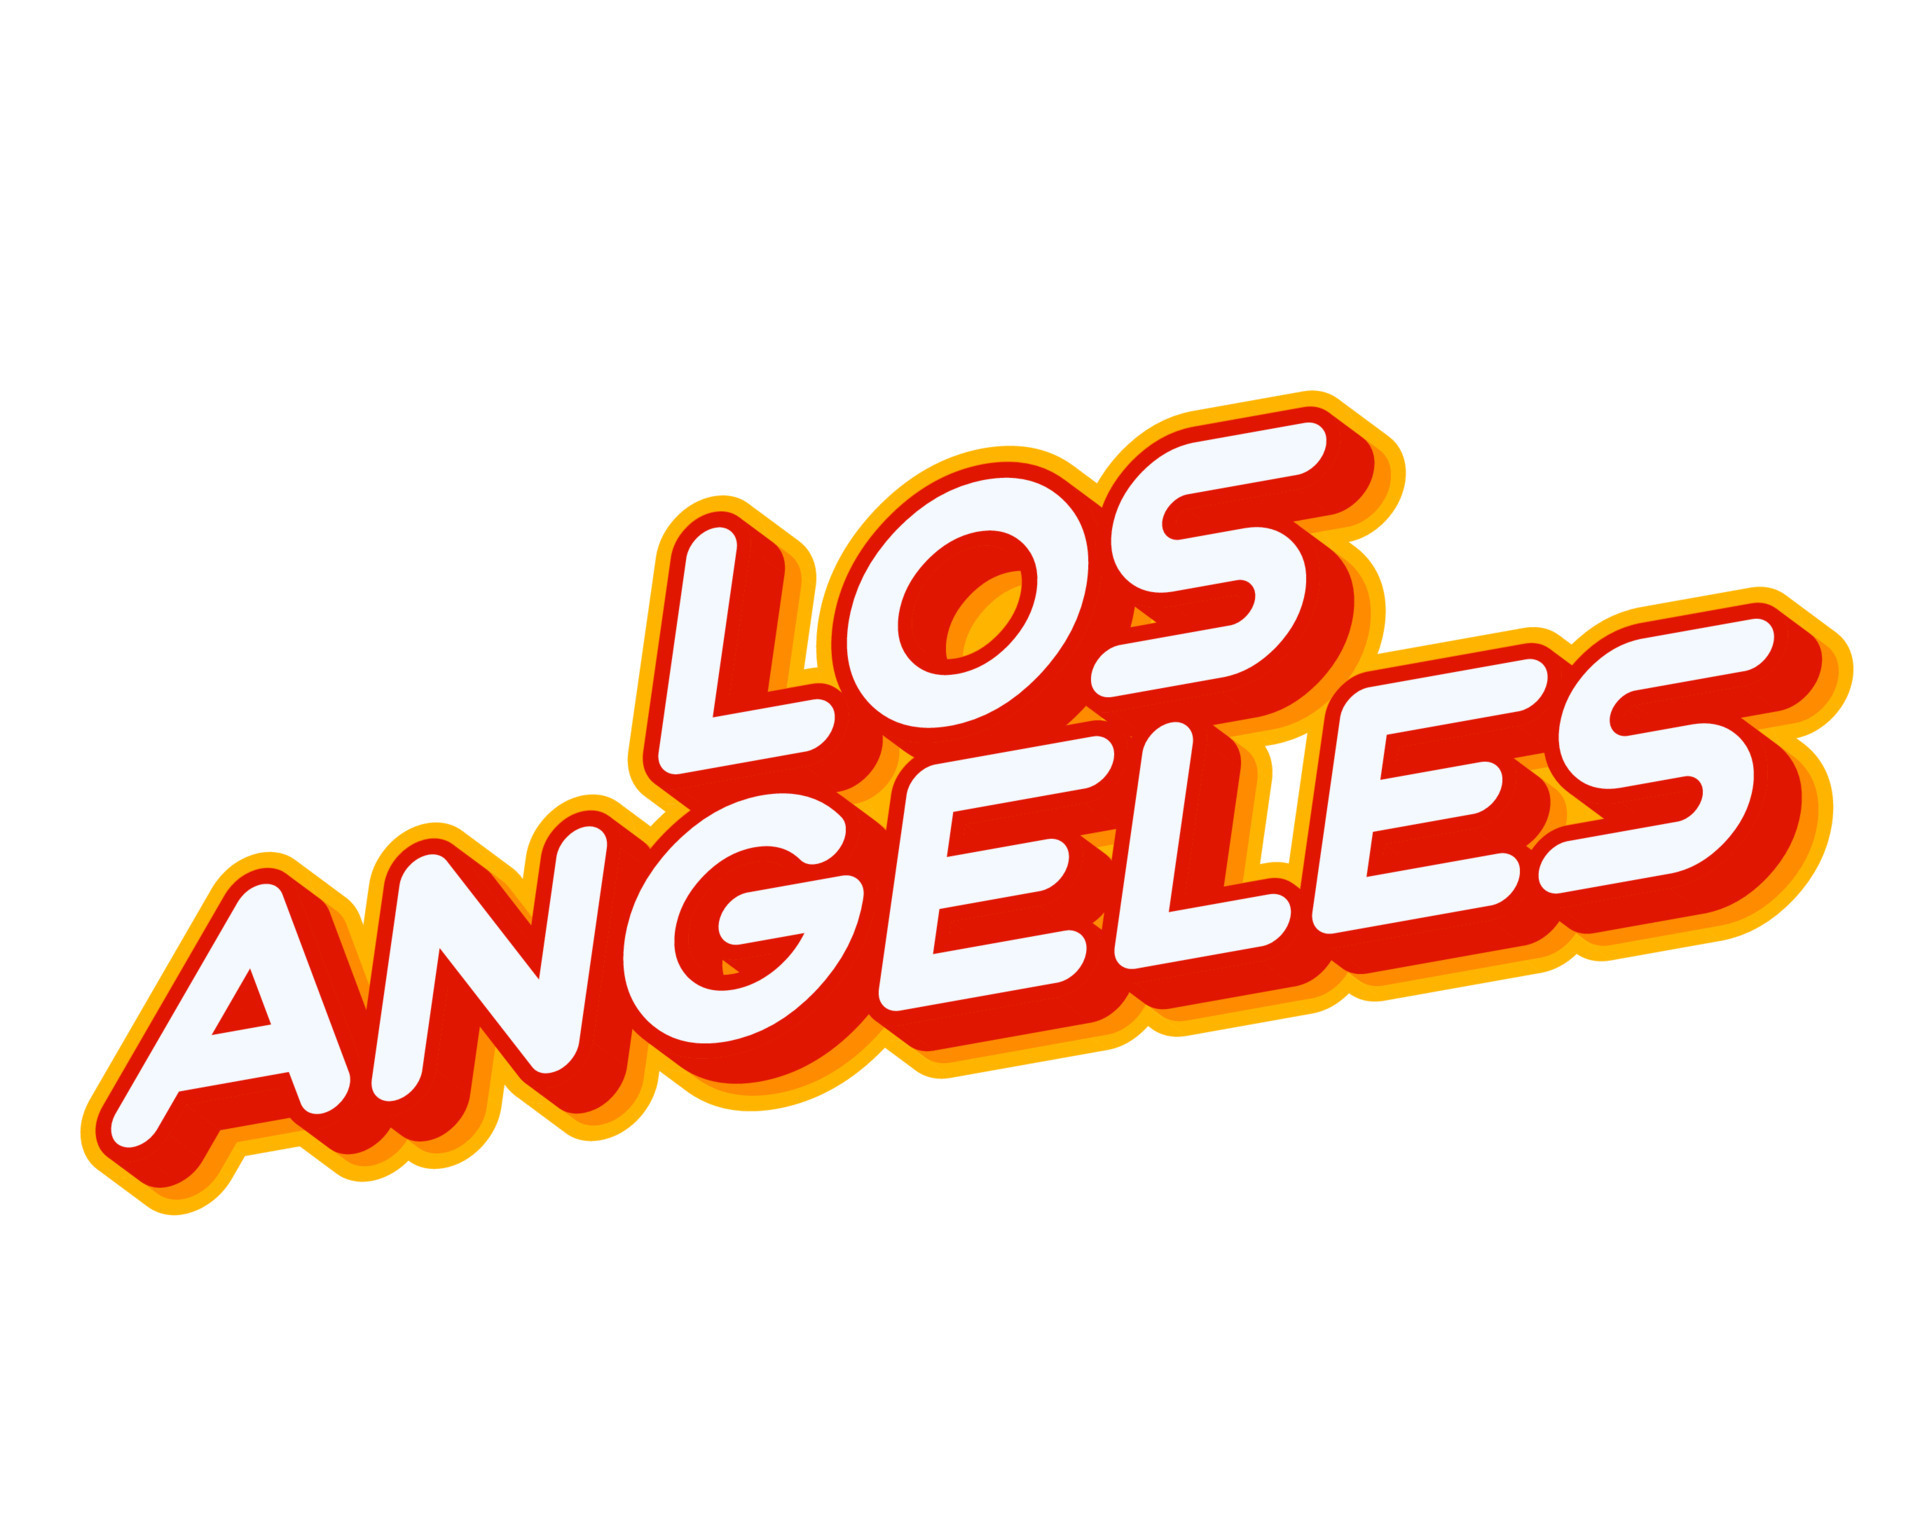 Los Angeles city of USA lettering isolated on white colourful text